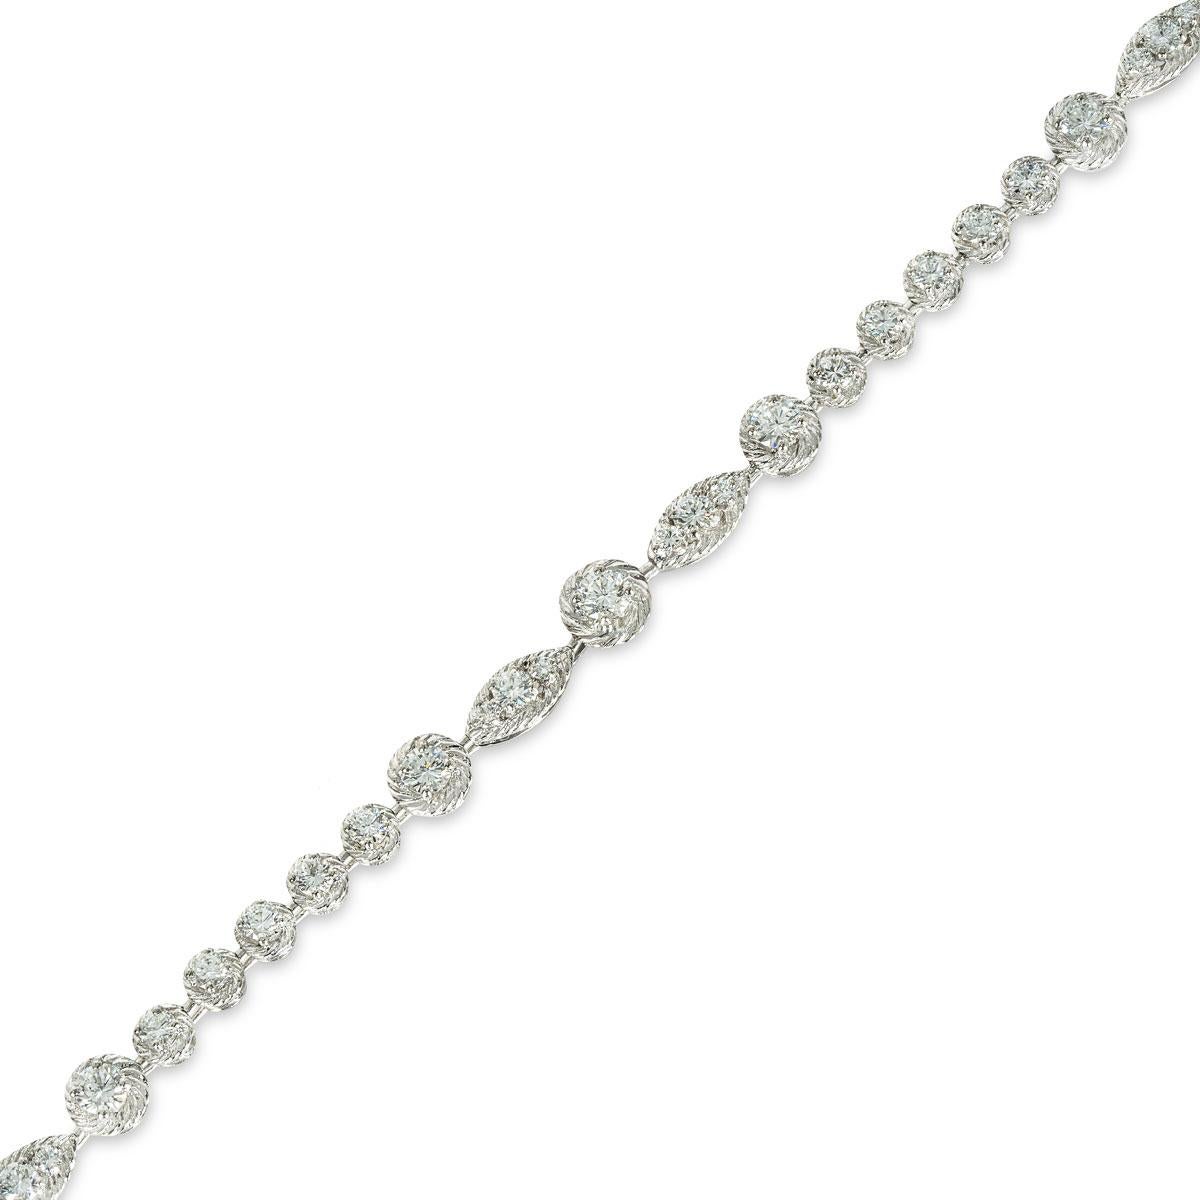 An elegant platinum diamond necklace by Van Cleef & Arpels. The necklace features stations alternating between 1 and 3 round brilliant cut diamonds with a decorative surround. A total of 84 round brilliant cut diamonds are set throughout the